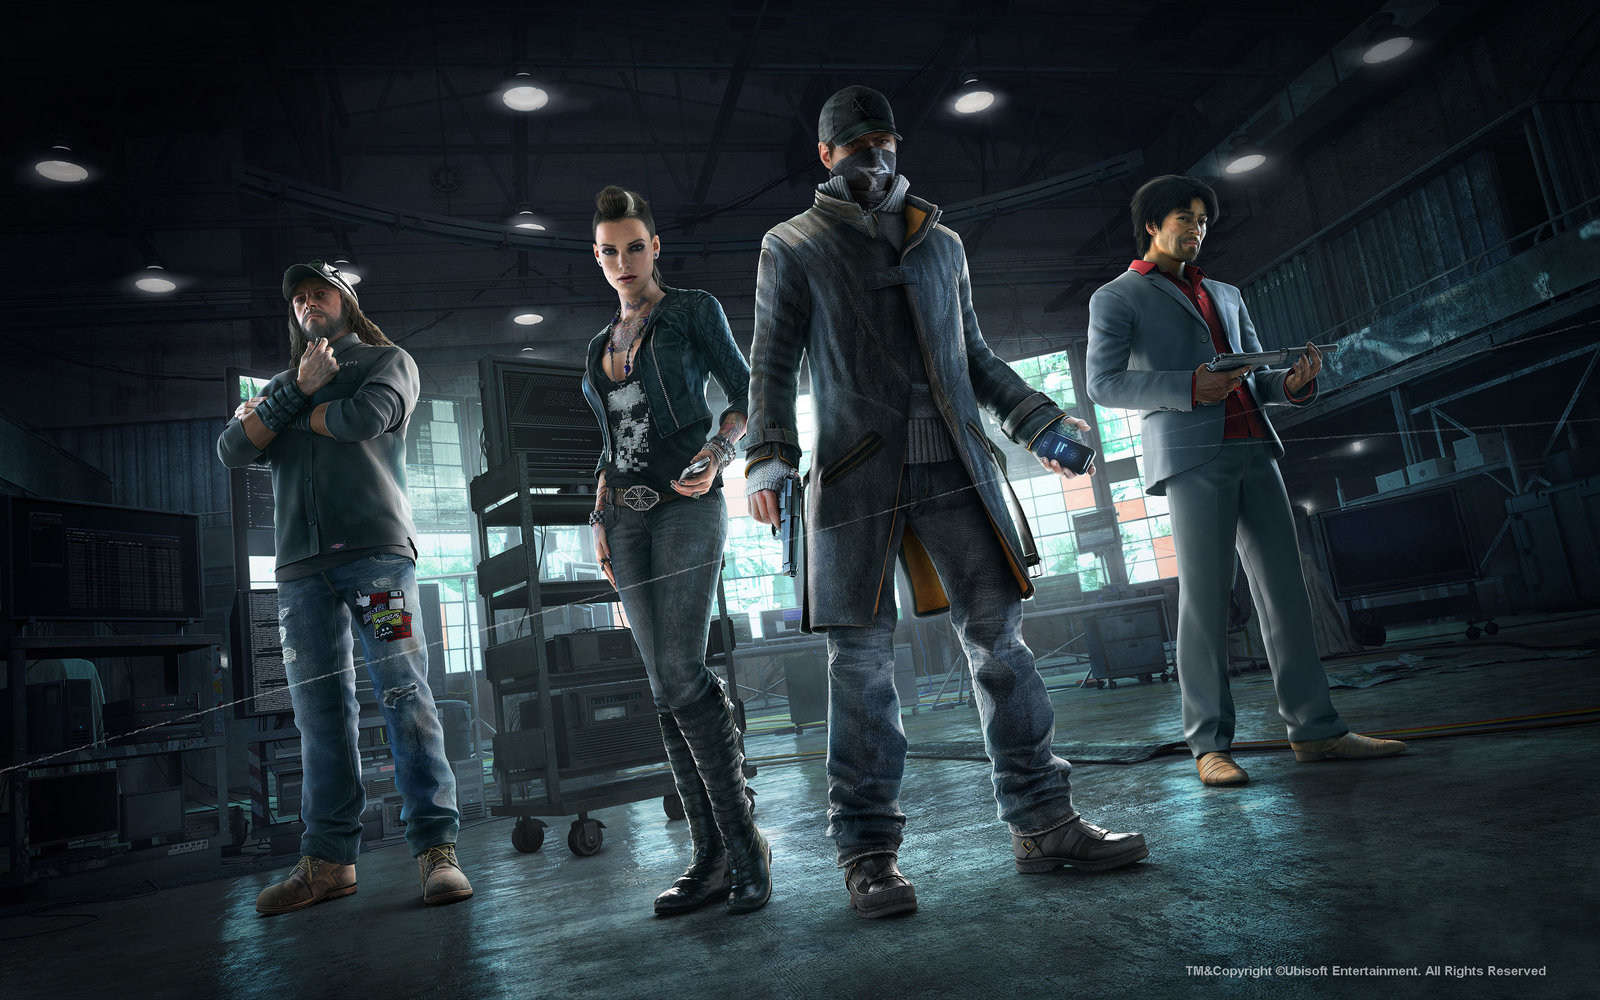 Watch Dogs - Family shot